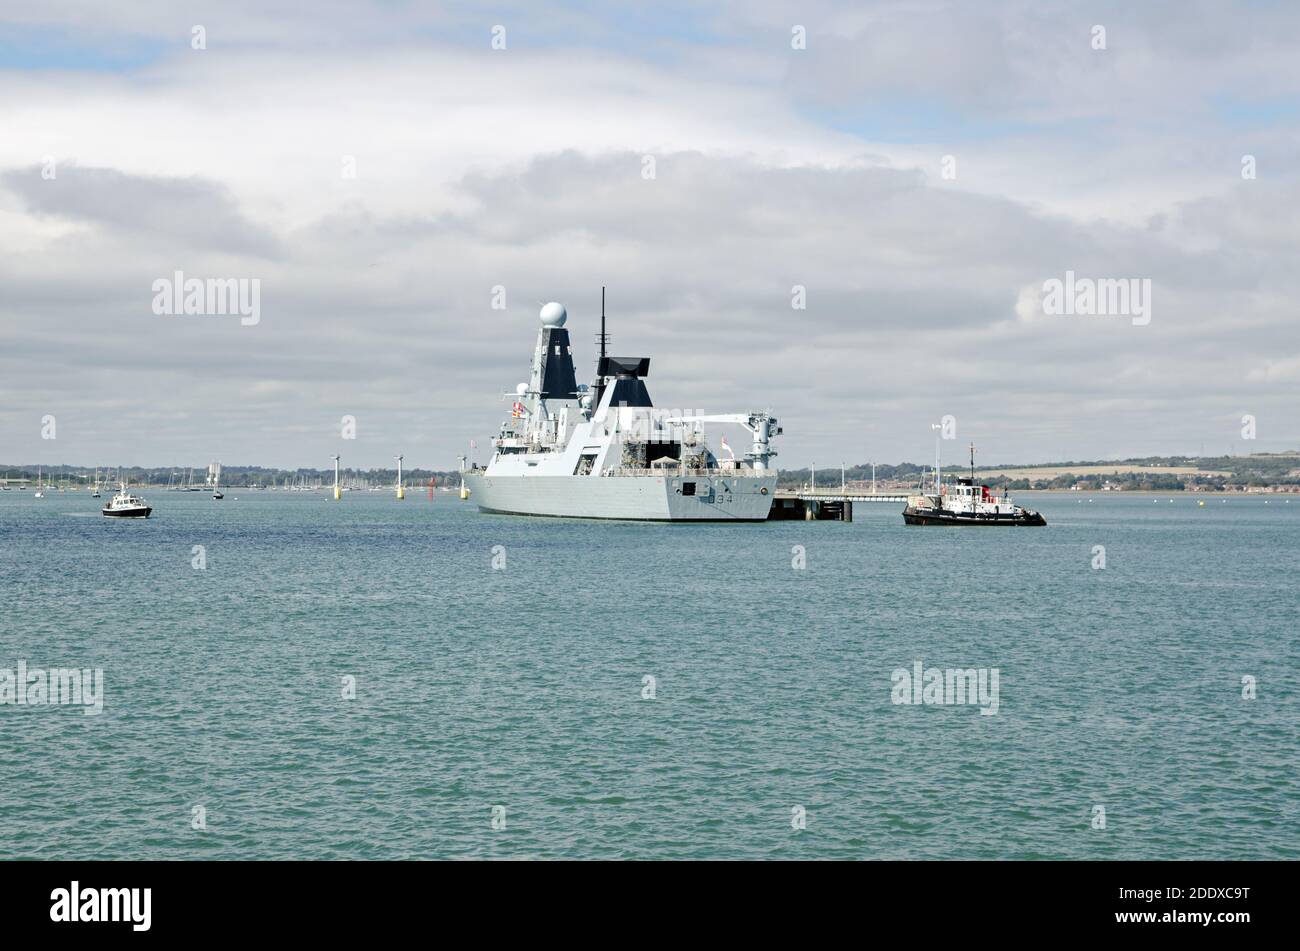 Portsmouth, UK - September 8, 2020:  The Royal Navy destroyer HMS Diamond moored at the Upper Harbour Ammunitioning Facility in Portsmouth Harbour, Ha Stock Photo